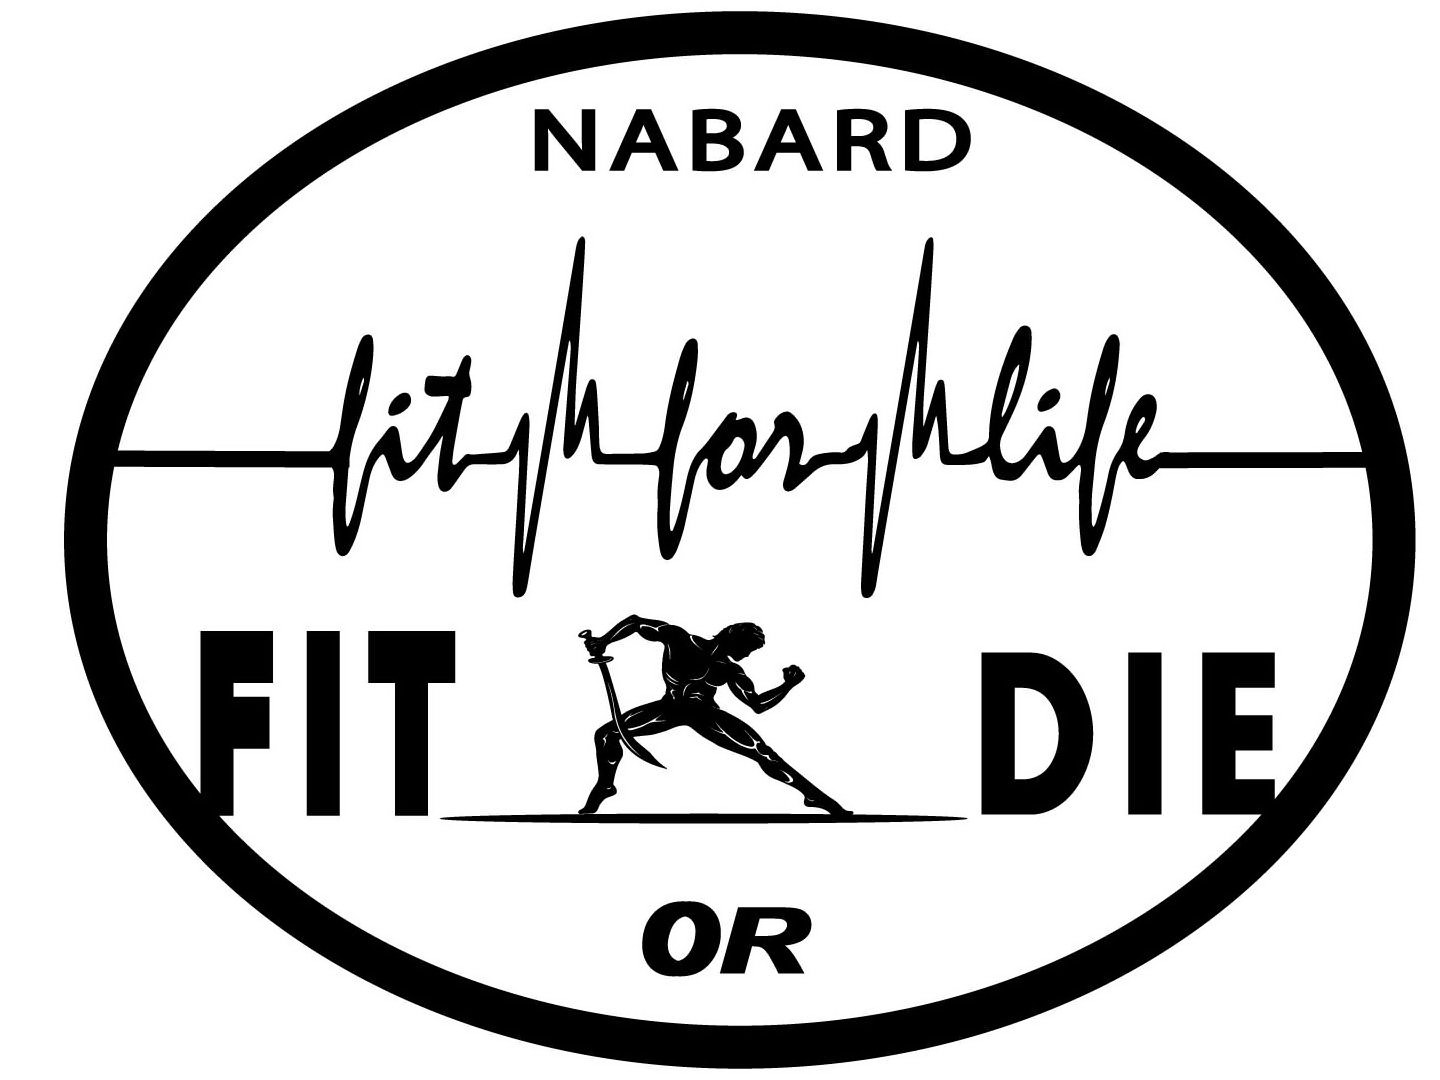 Trademark Logo NABARD FIT FOR LIFE FIT OR DIE